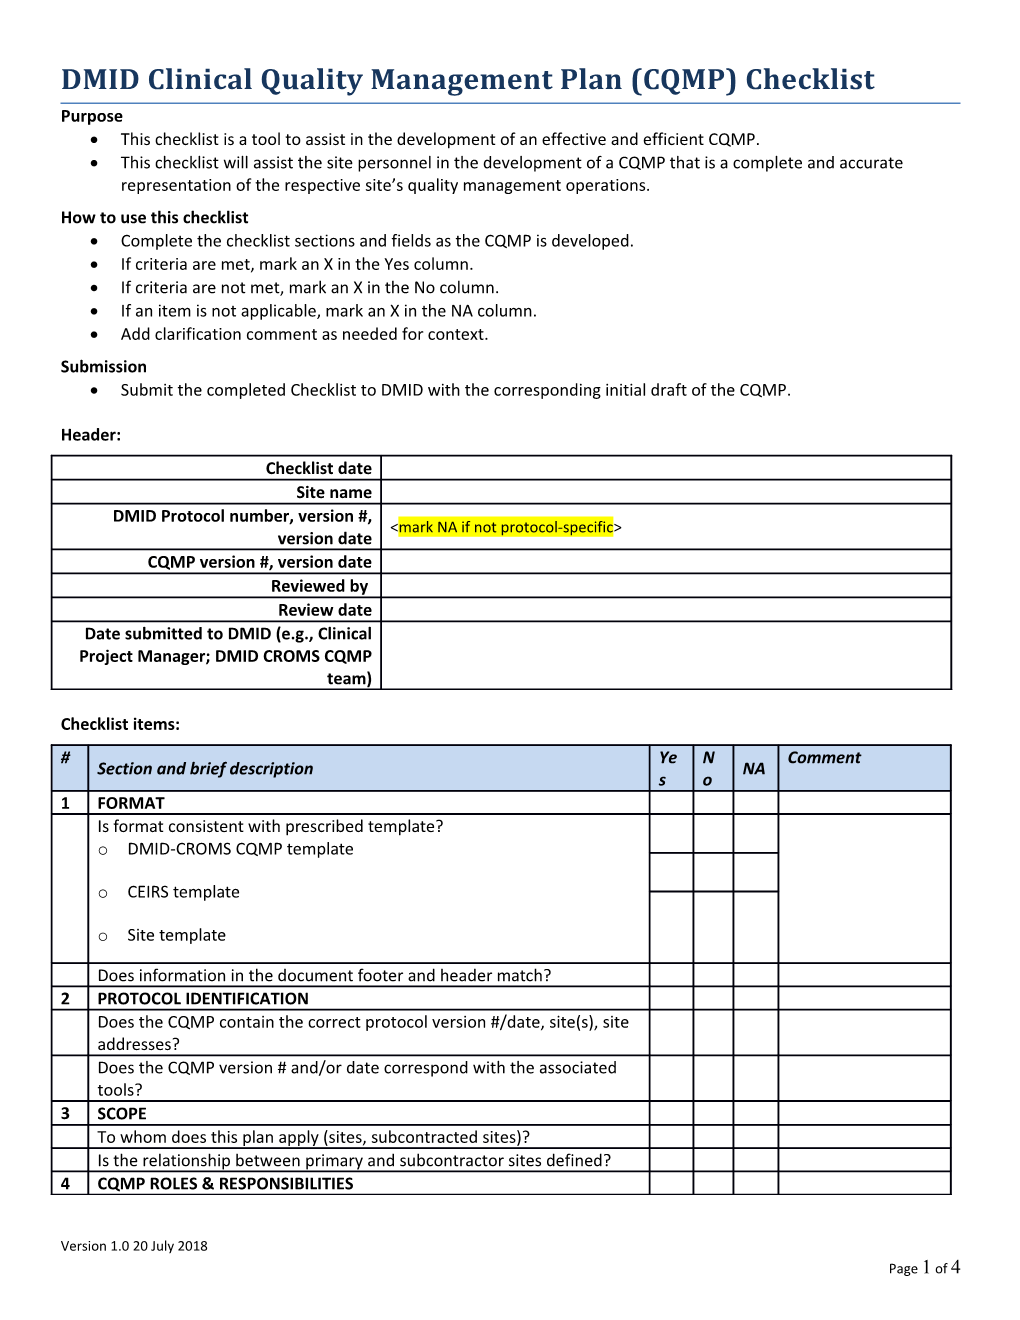 DMID Clinical Quality Management Plan Checklist 23July2018